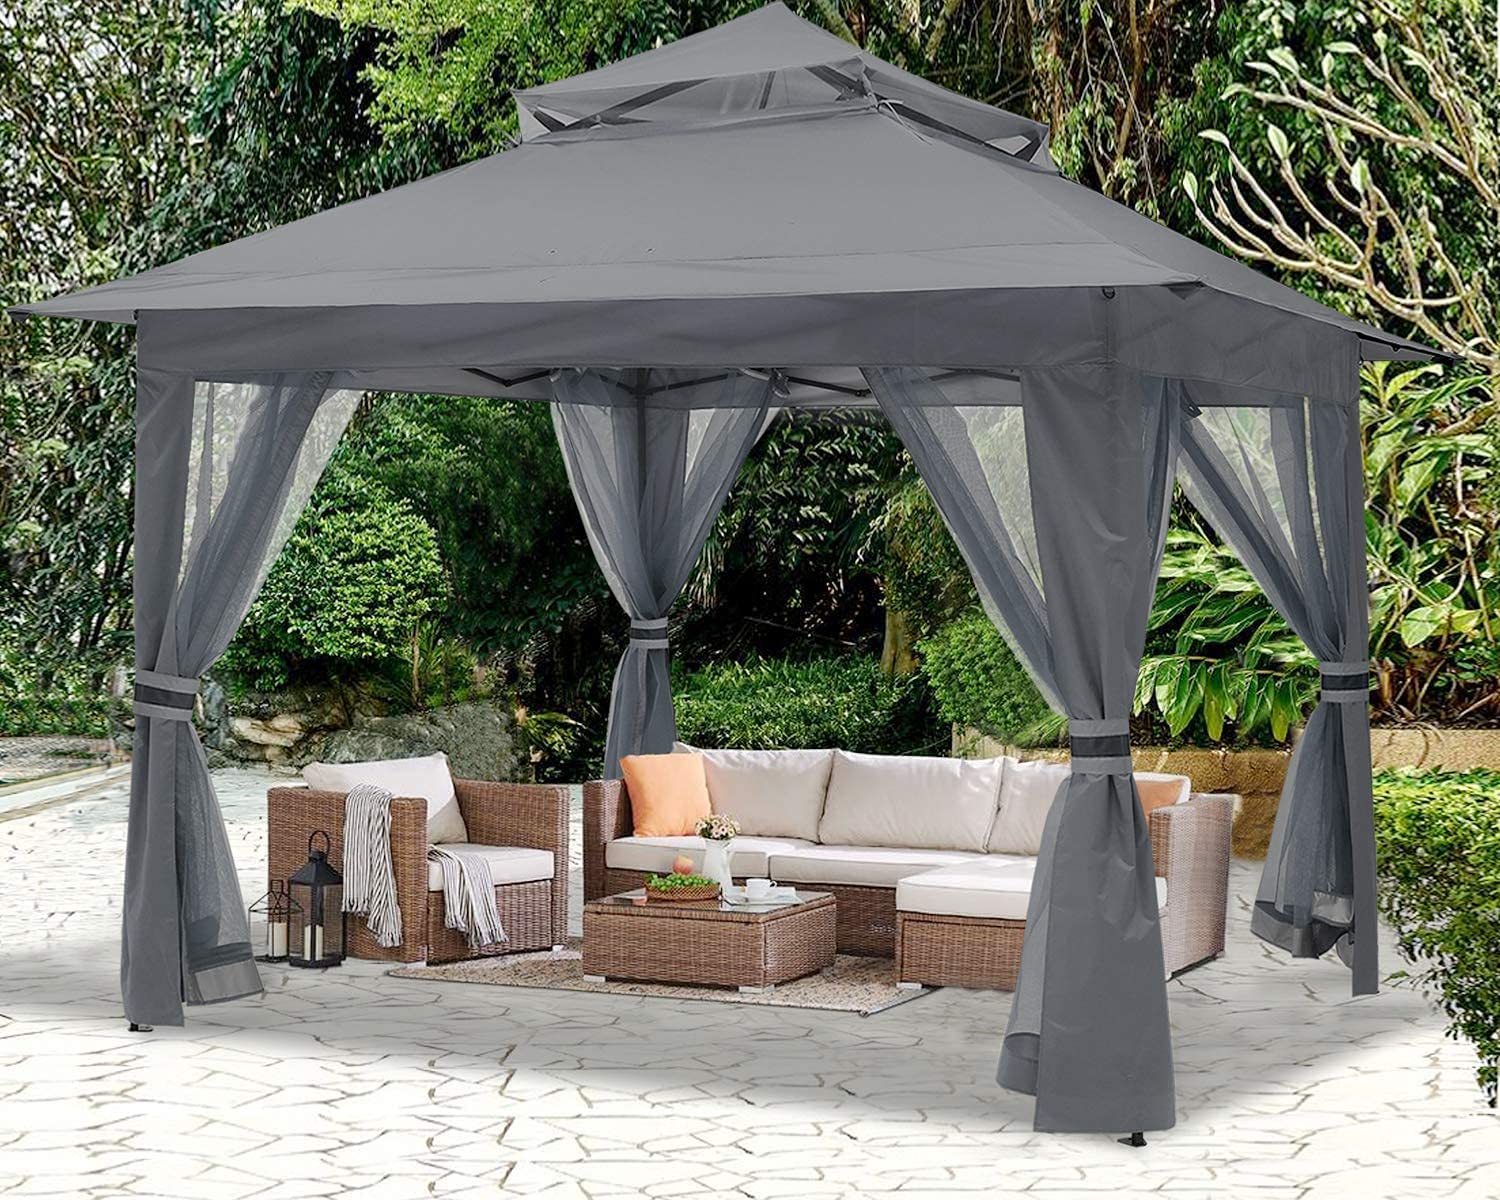 Yunt-11 Outdoor Canopy Tent,Commercial Tents Market stall Outdoor Sun Protection Folding Tent Shed Rain Cloth Shelter Cover Tent Accessories 